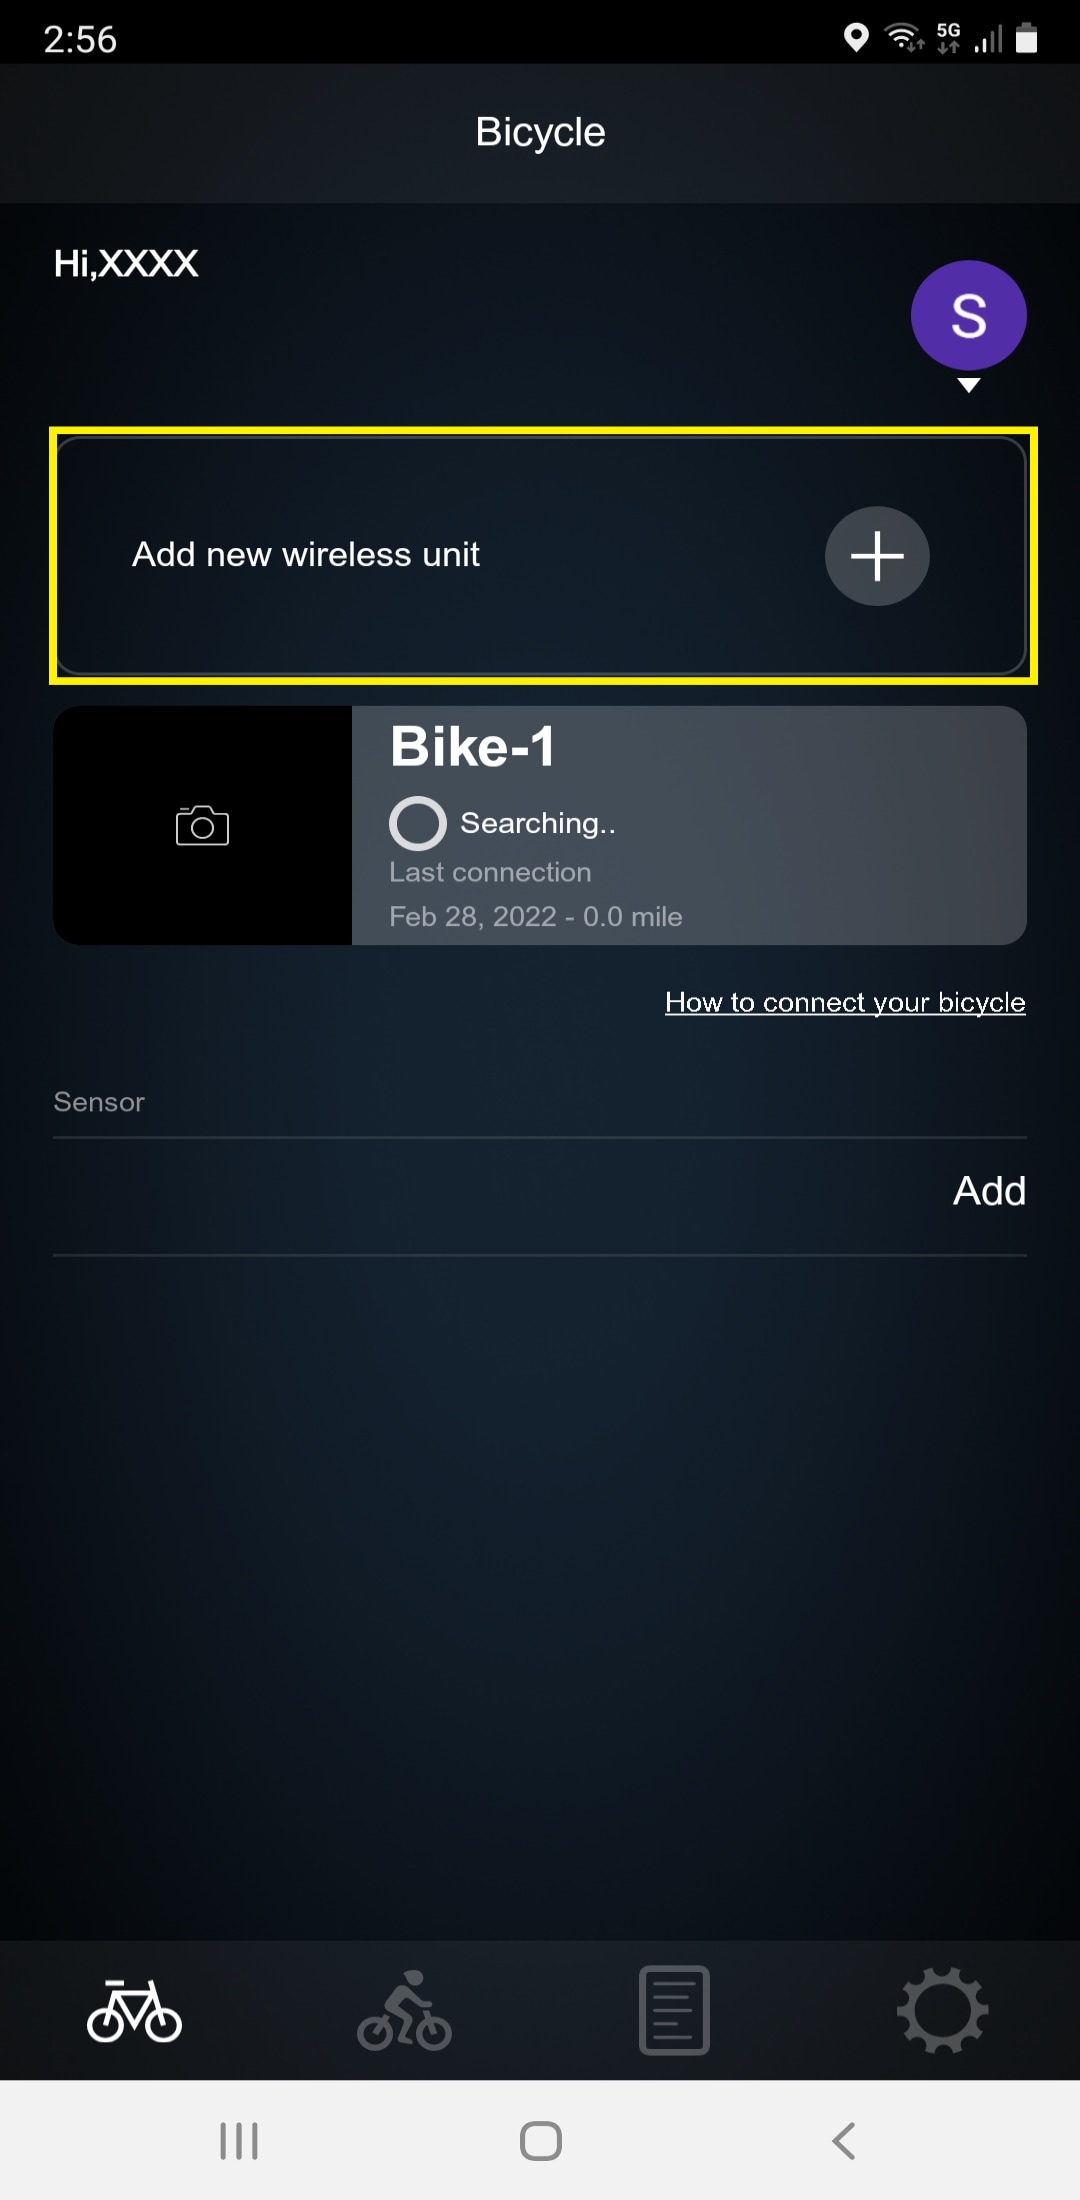 If the bicycle cannot be connected, tap 'Connect from wireless unit' to connect from the wireless unit you are using.